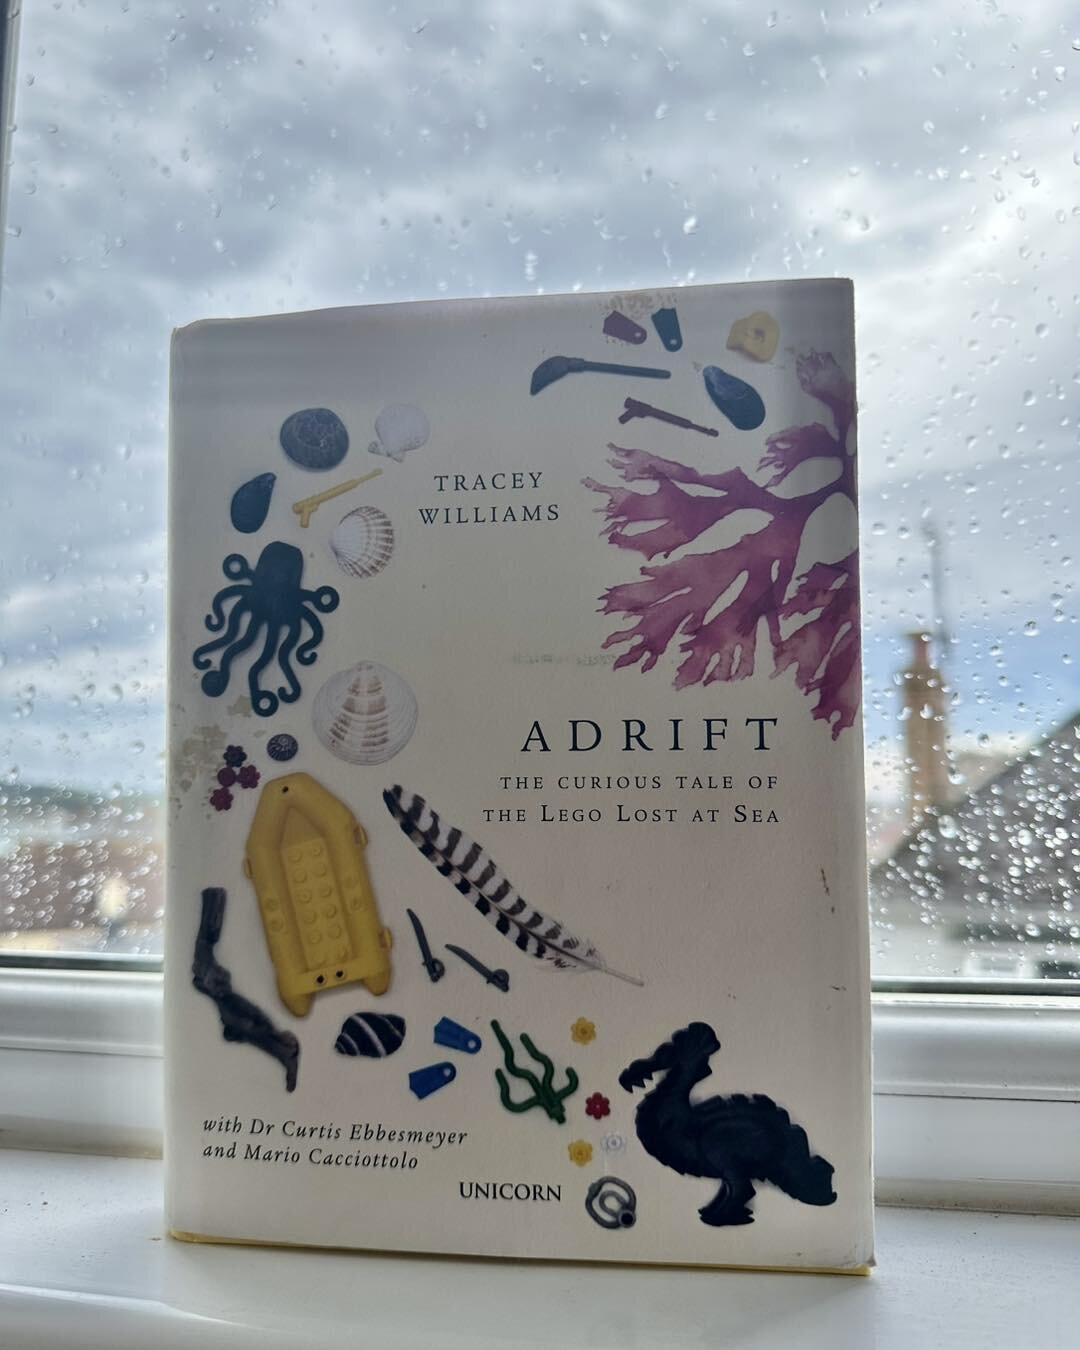 Rainy day blues?  Not here! 

It&rsquo;s a great day to curl up with a good book, and I&rsquo;m absolutely loving the re-read of &lsquo;Adrift&rsquo; by Tracey Williams of Lego Lost At Sea.

As well as Tracey&rsquo;s huge breadth of knowledge on Lego